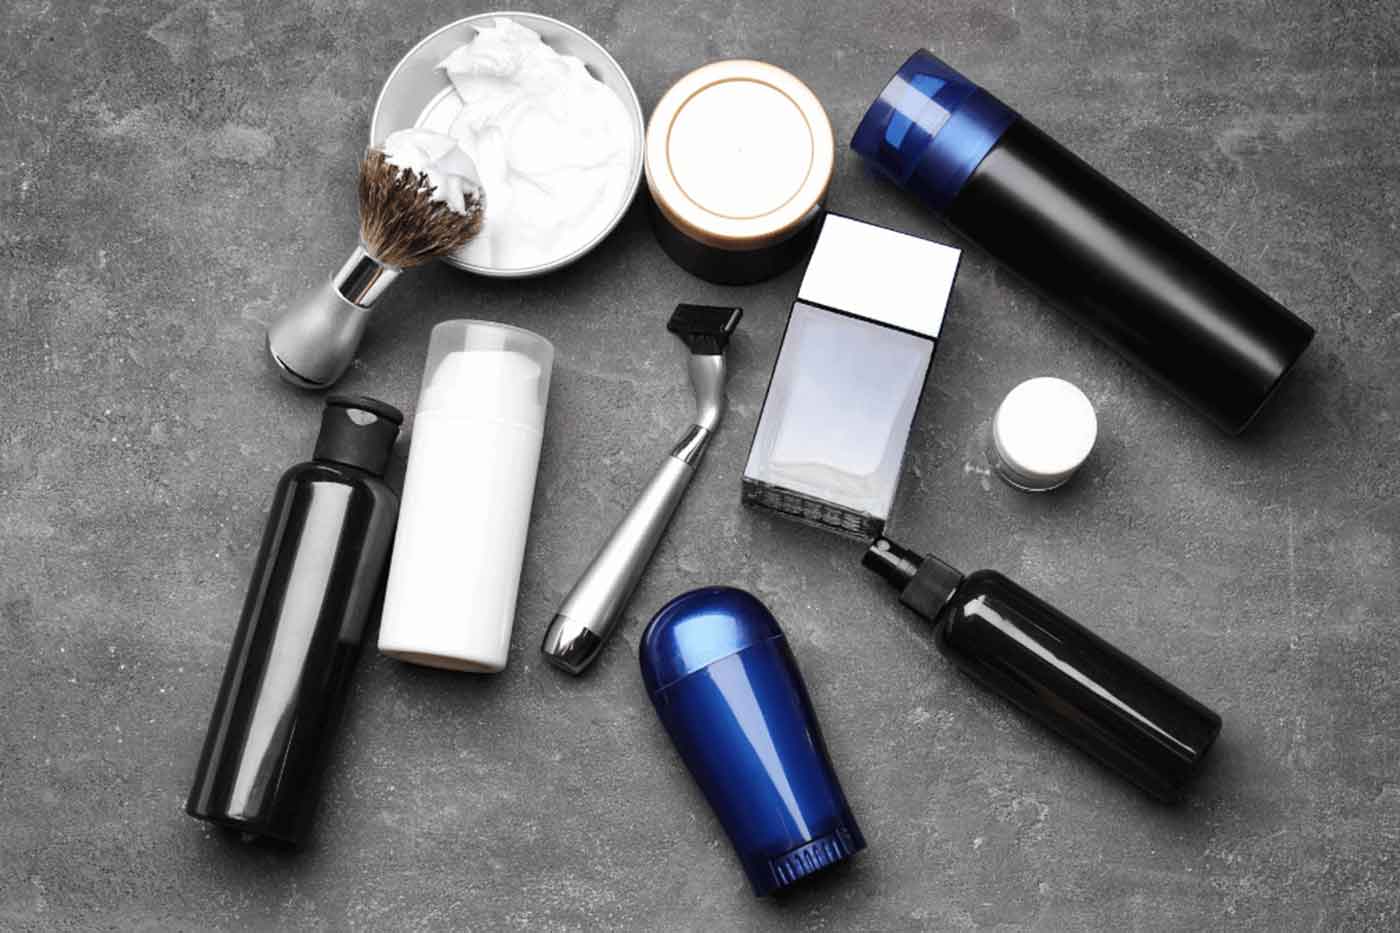 Good Glamm Group to foray into men’s grooming and expand globally